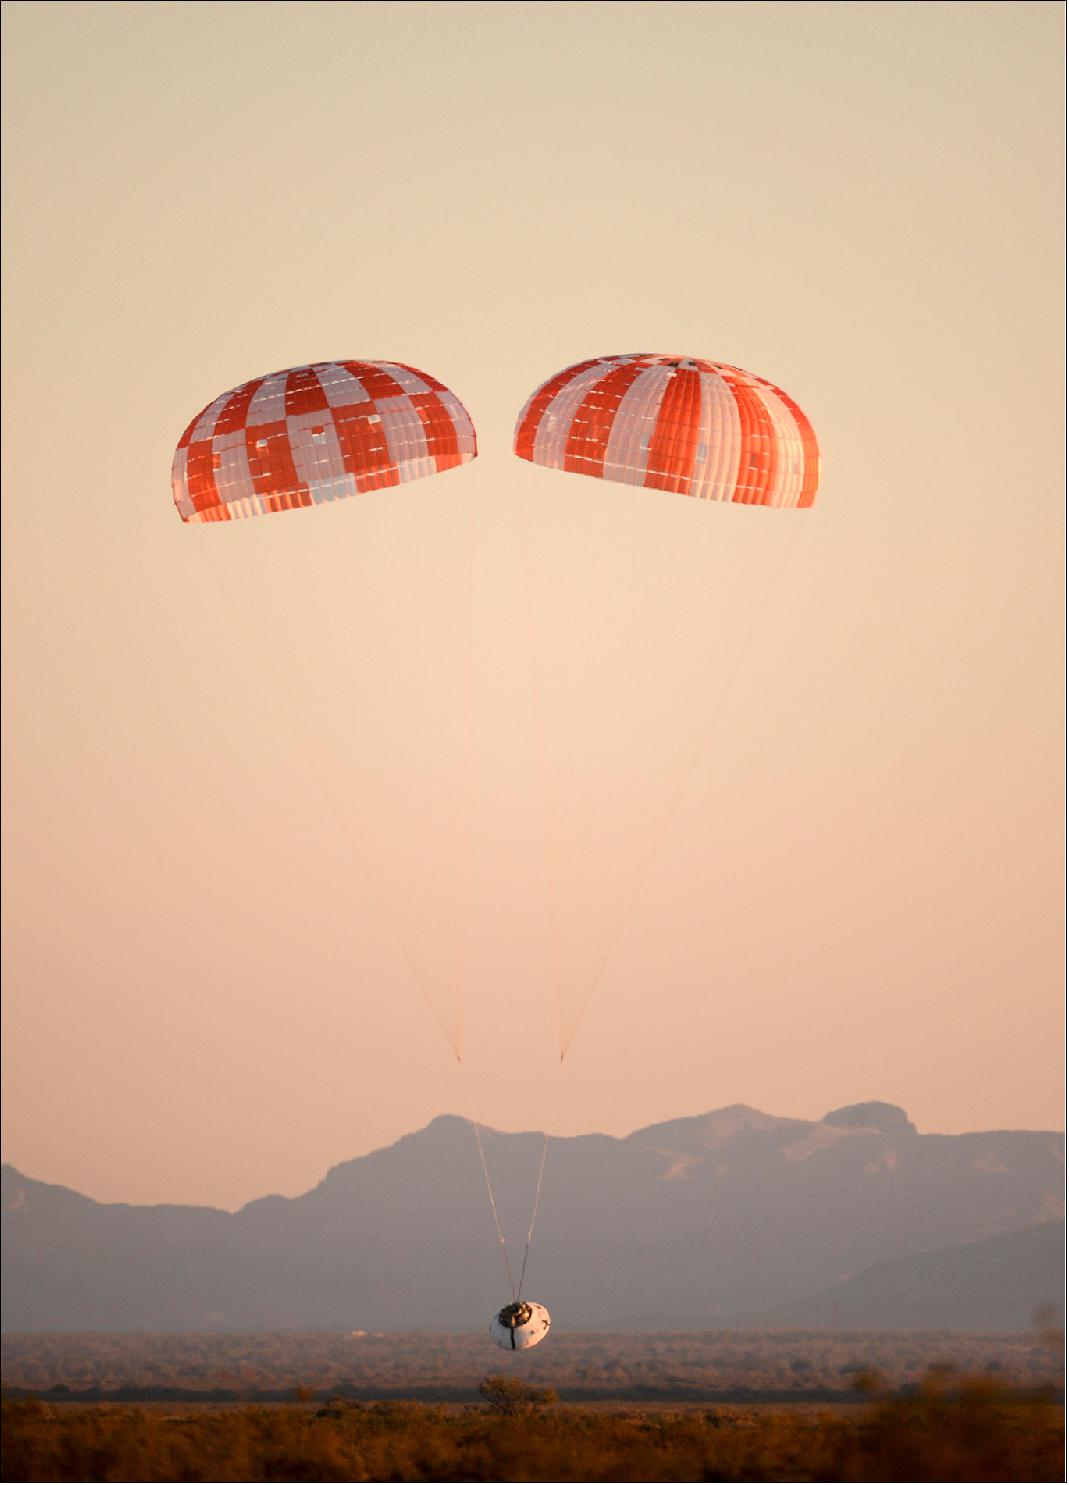 Figure 50: NASA is testing Orion’s parachutes to qualify the system for missions with astronauts (image credits: U.S. Army)